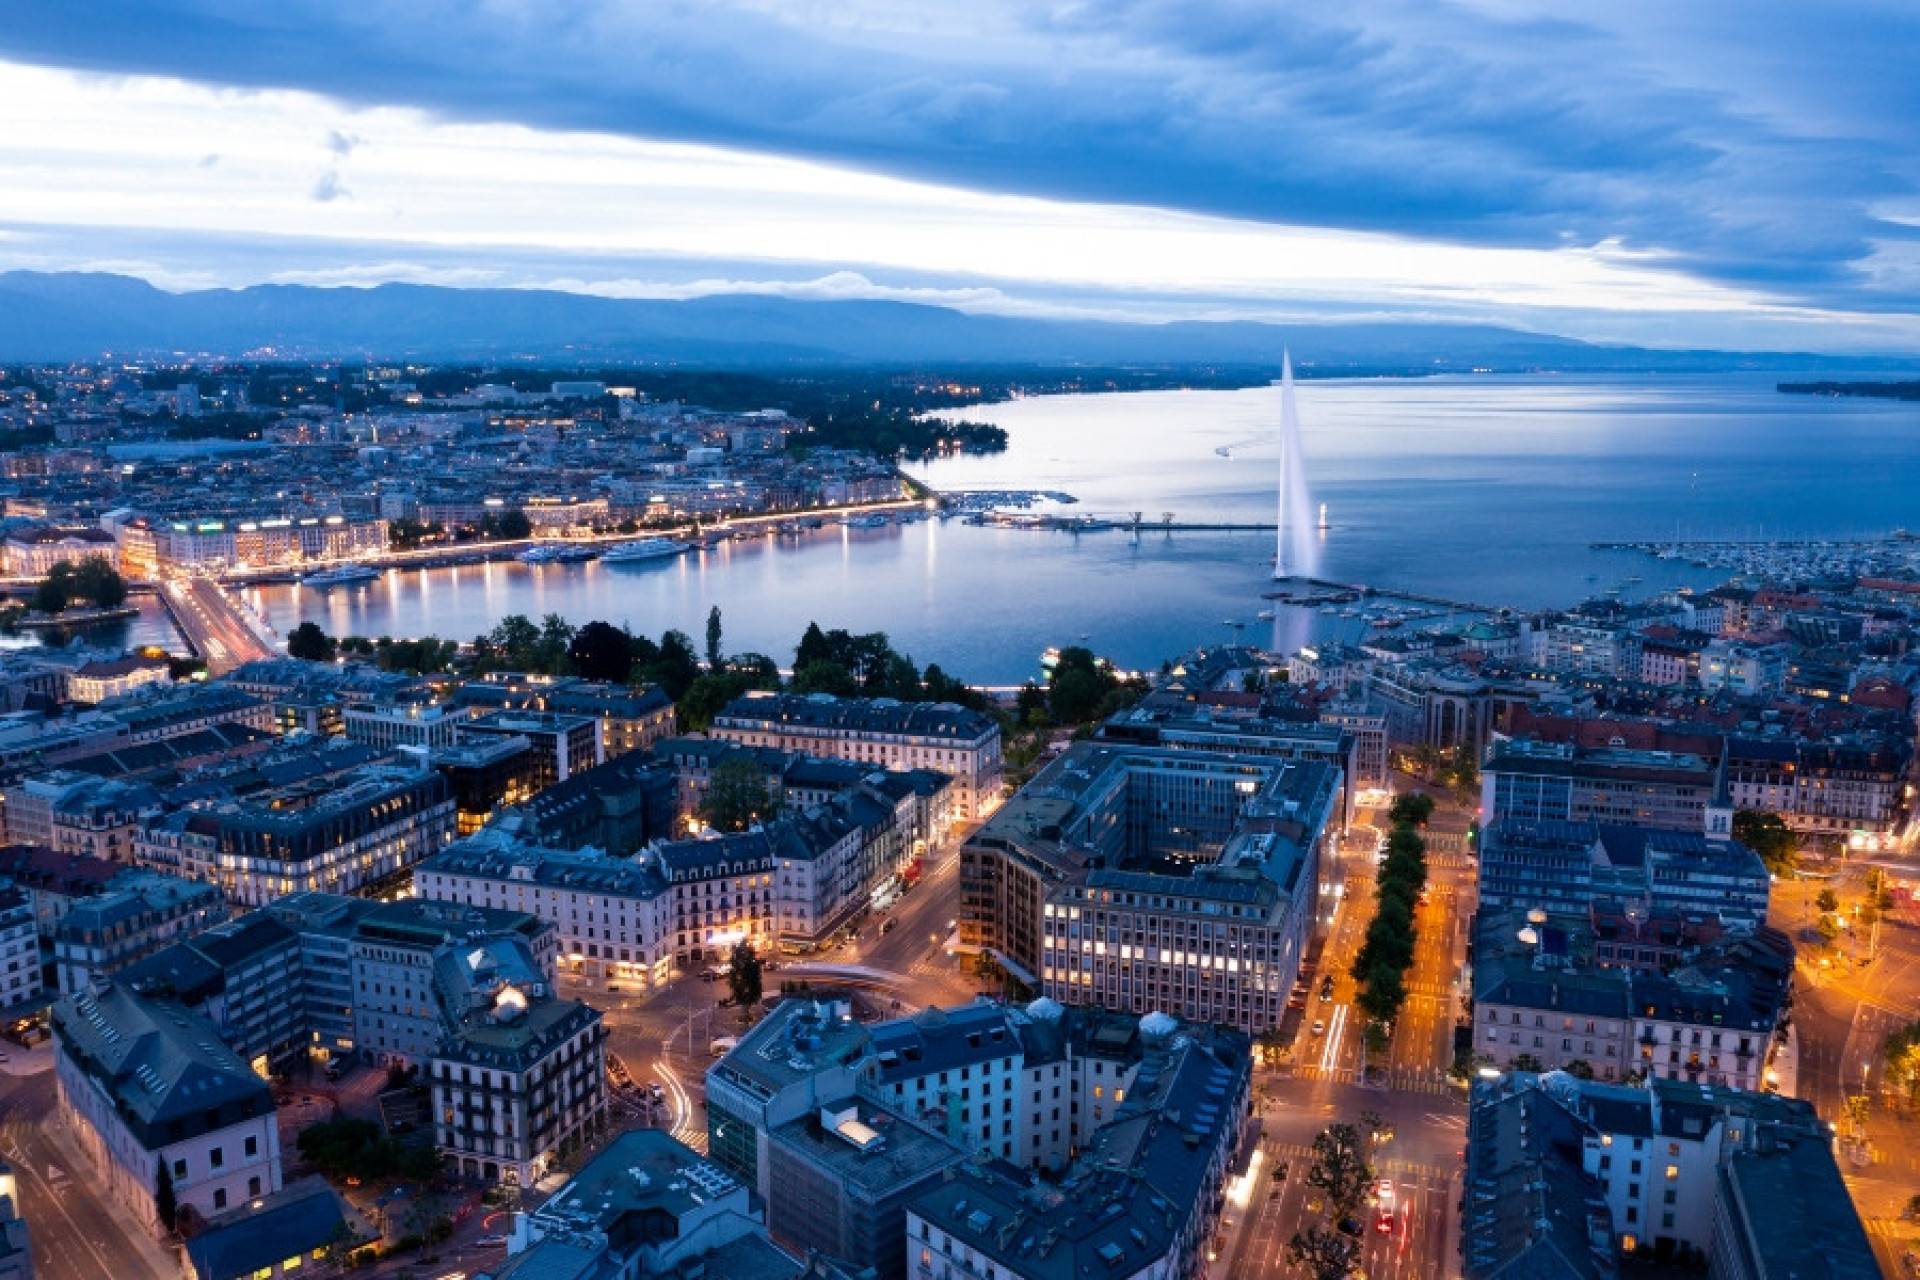 <p>Often regarded as having one the best healthcare systems in the world and boasting an outstanding economy, Switzerland's citizens get to reap the benefits of both and thus can prosper.</p><p><a href="https://www.msn.com/en-us/community/channel/vid-7xx8mnucu55yw63we9va2gwr7uihbxwc68fxqp25x6tg4ftibpra?cvid=94631541bc0f4f89bfd59158d696ad7e">Follow us and access great exclusive content every day</a></p>